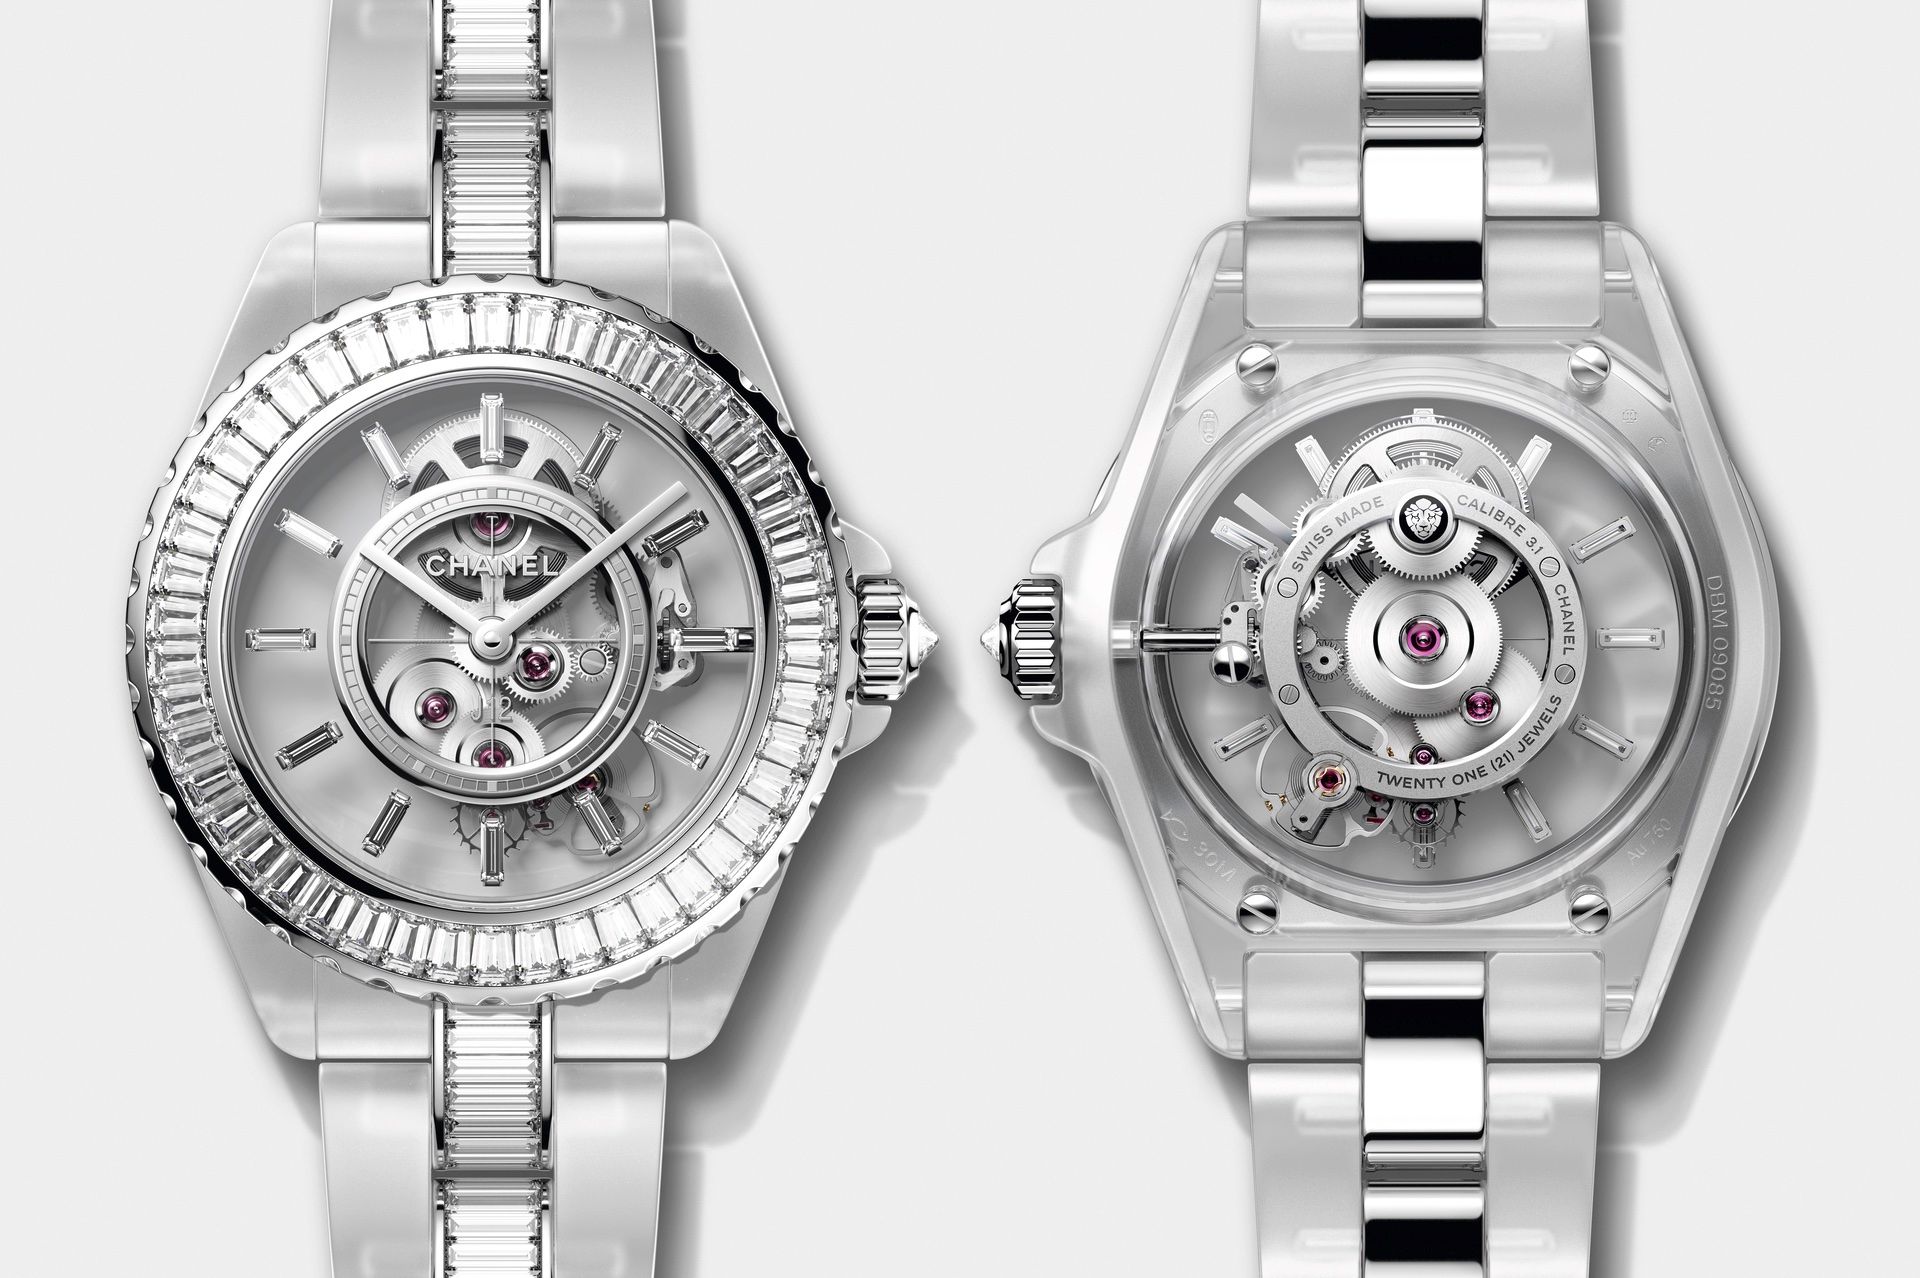 EDITOR'S PICK: The evolution of Chanel's in-house watchmaking